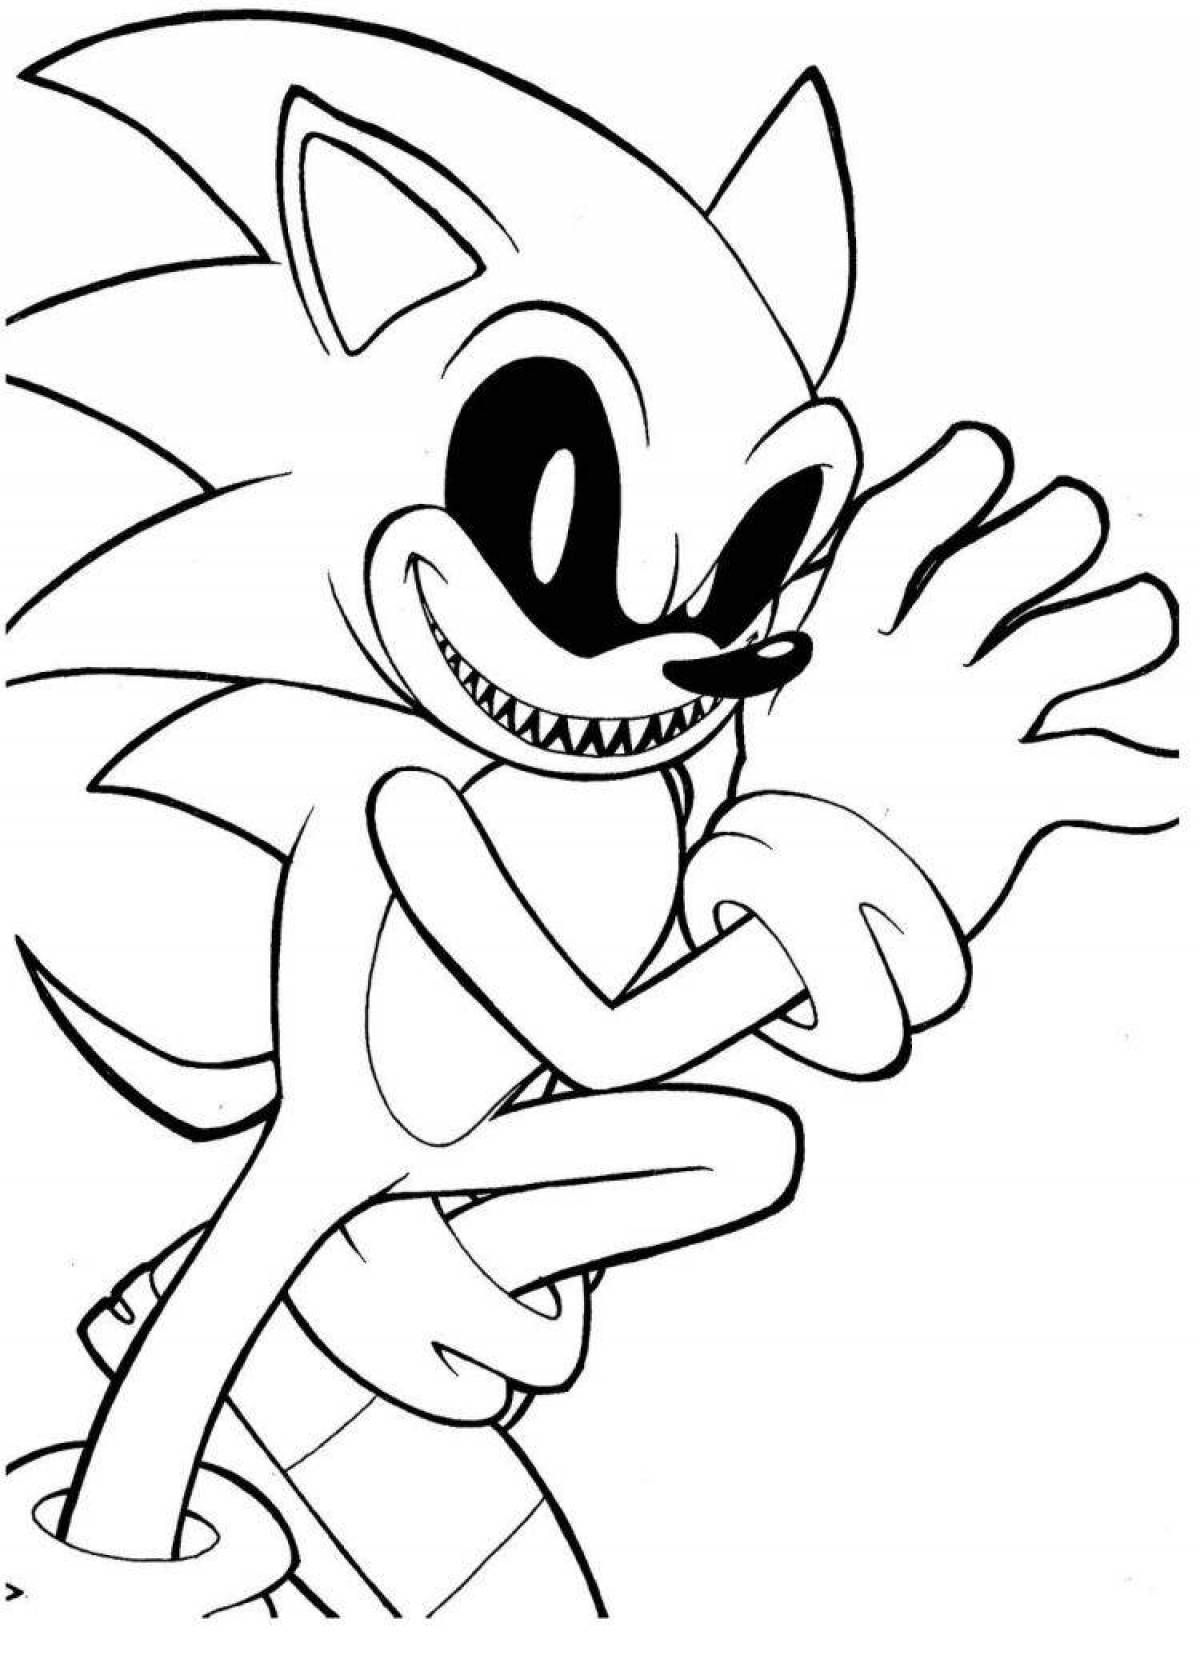 Coloring book energetic sonic egze